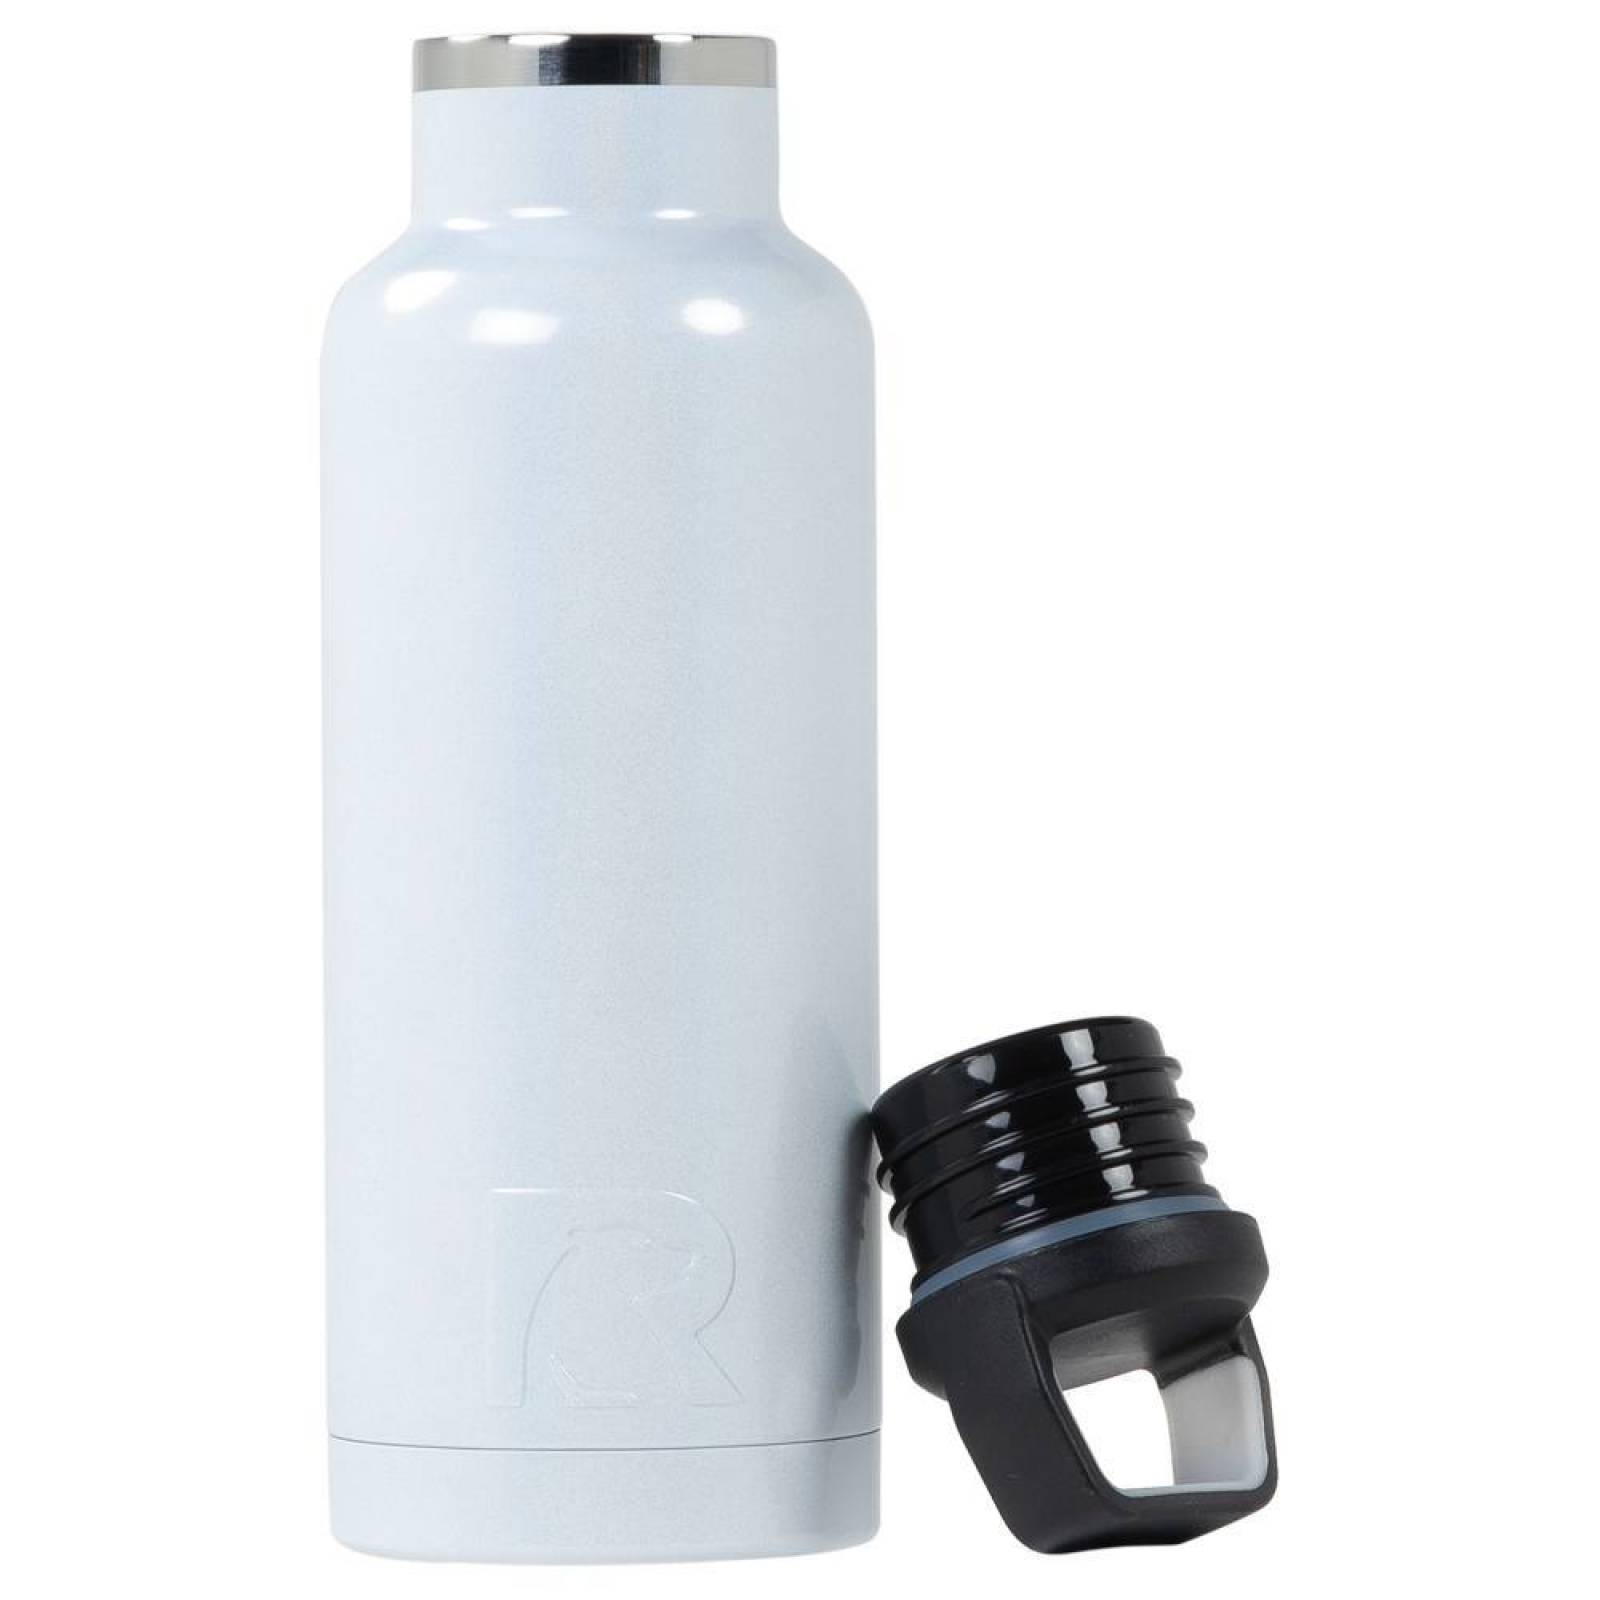 RTIC Water Bottle 16 oz. Snow Glossy   1035